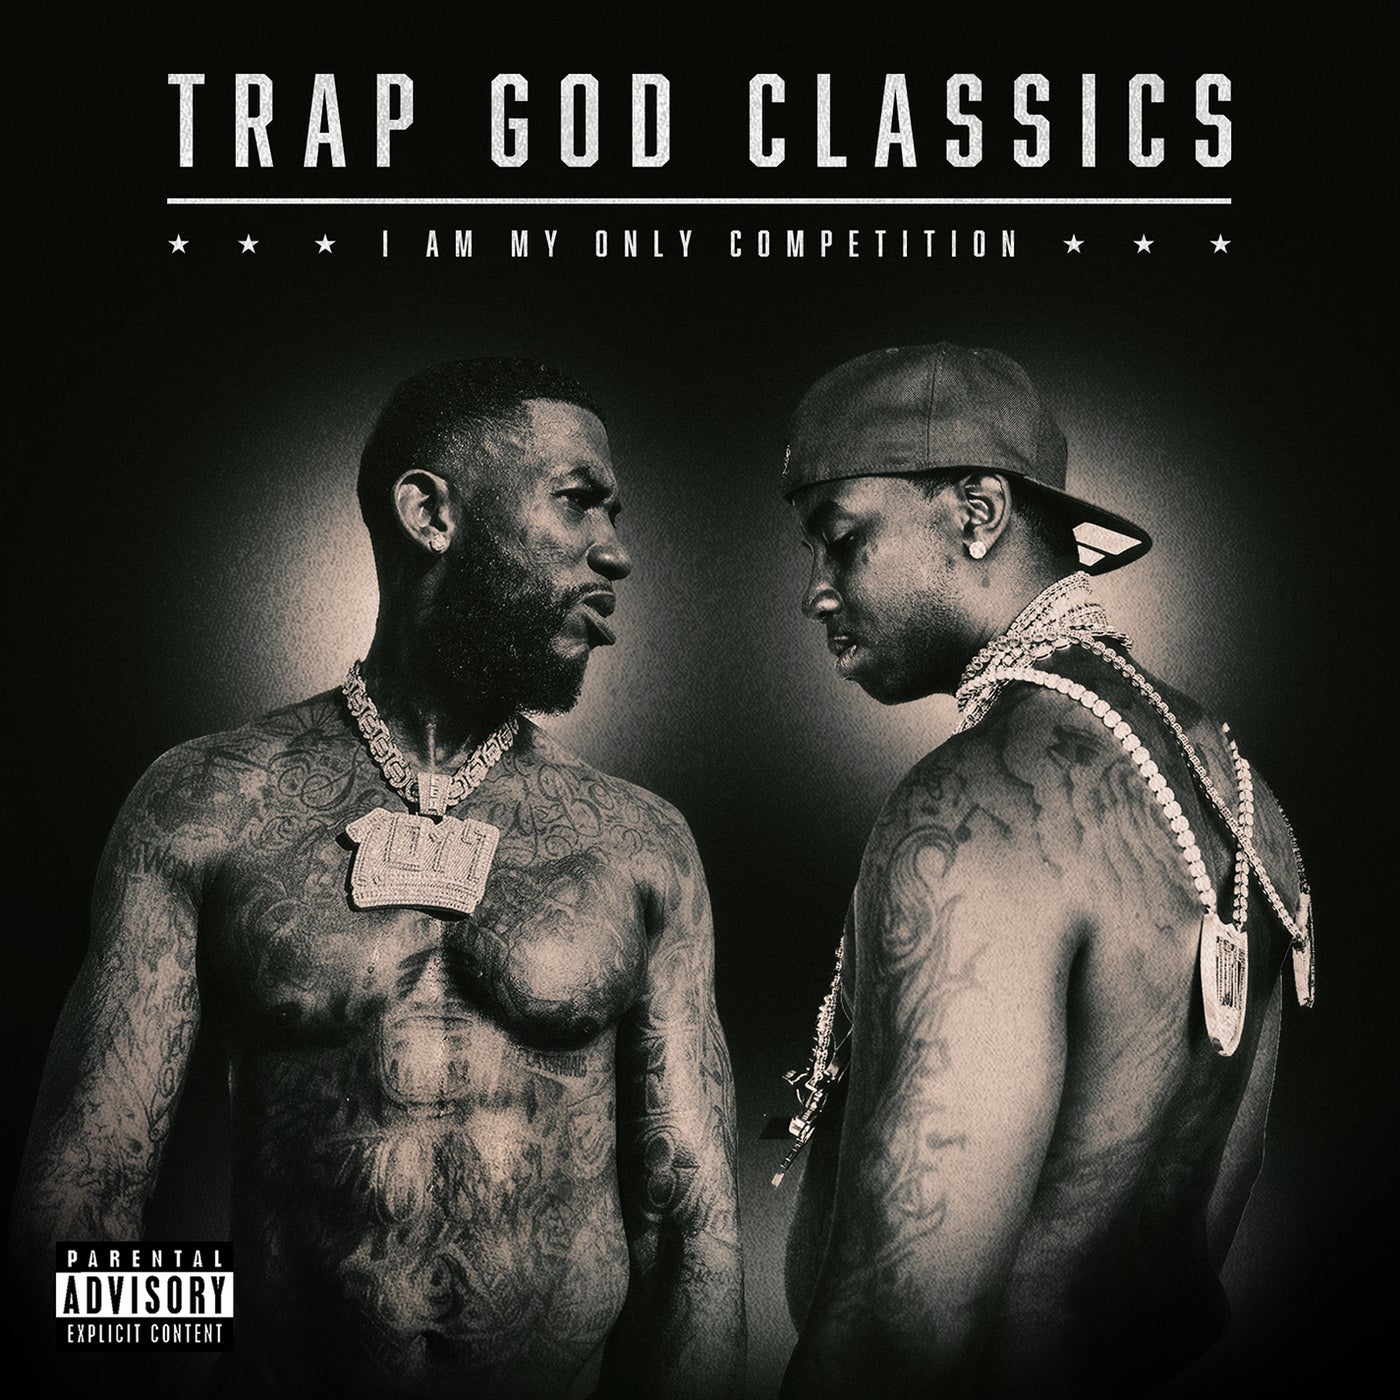 Trap God Classics: I Am My Only Competition by Gucci Mane, Migos